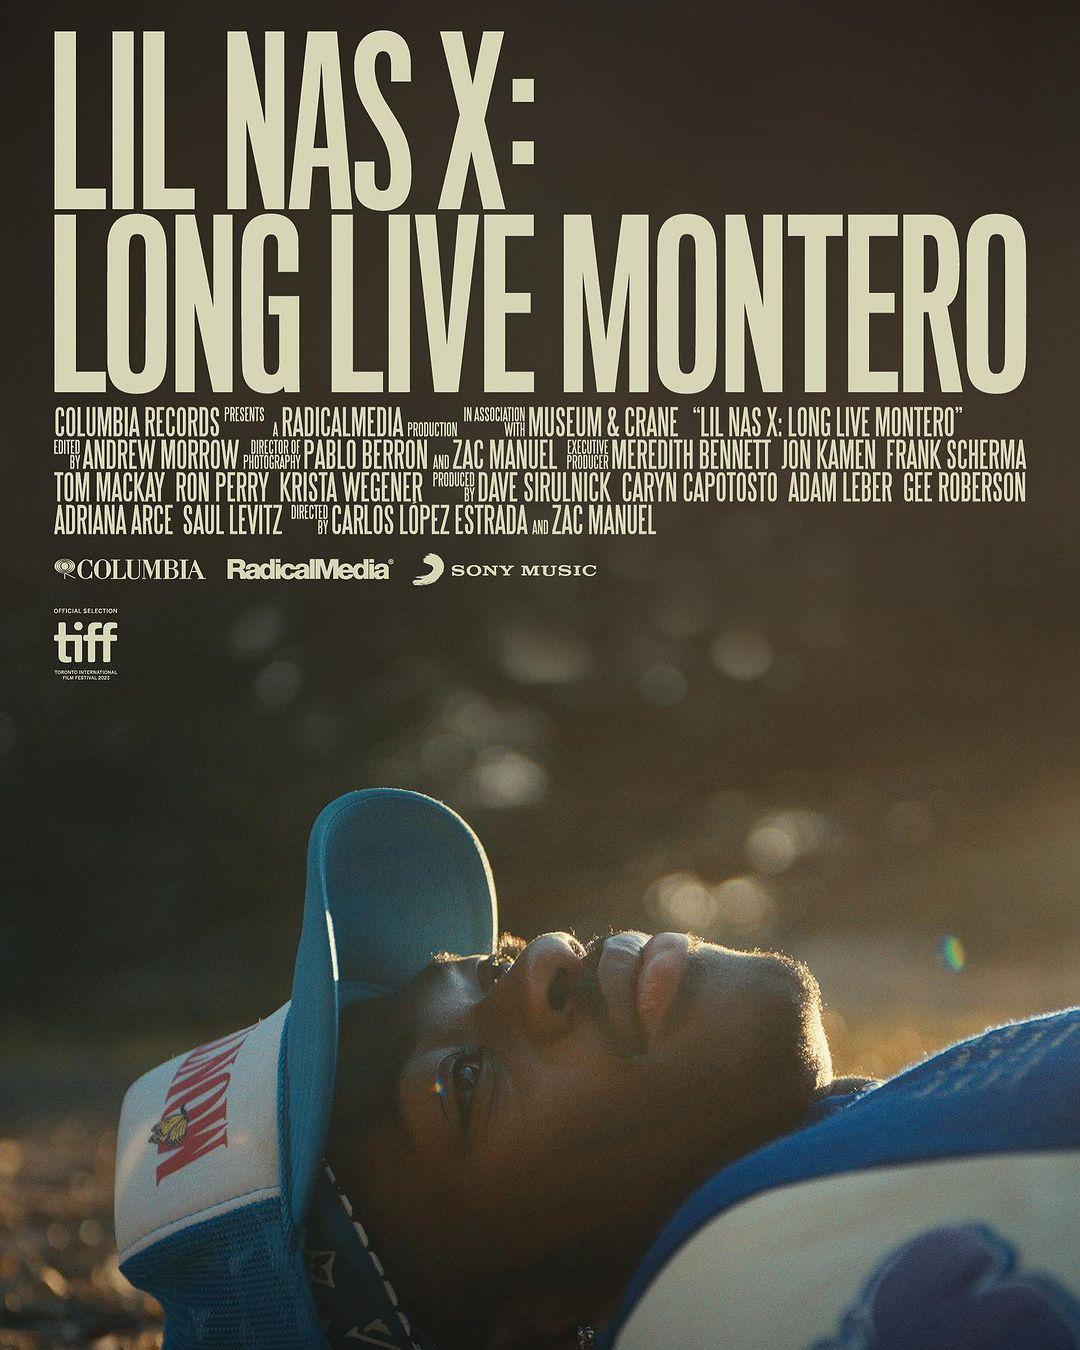 Lil Nas X's Documentary, 'Lil Nas X: Long Live Montero,' To Premiere At Upcoming Toronto Film Festival